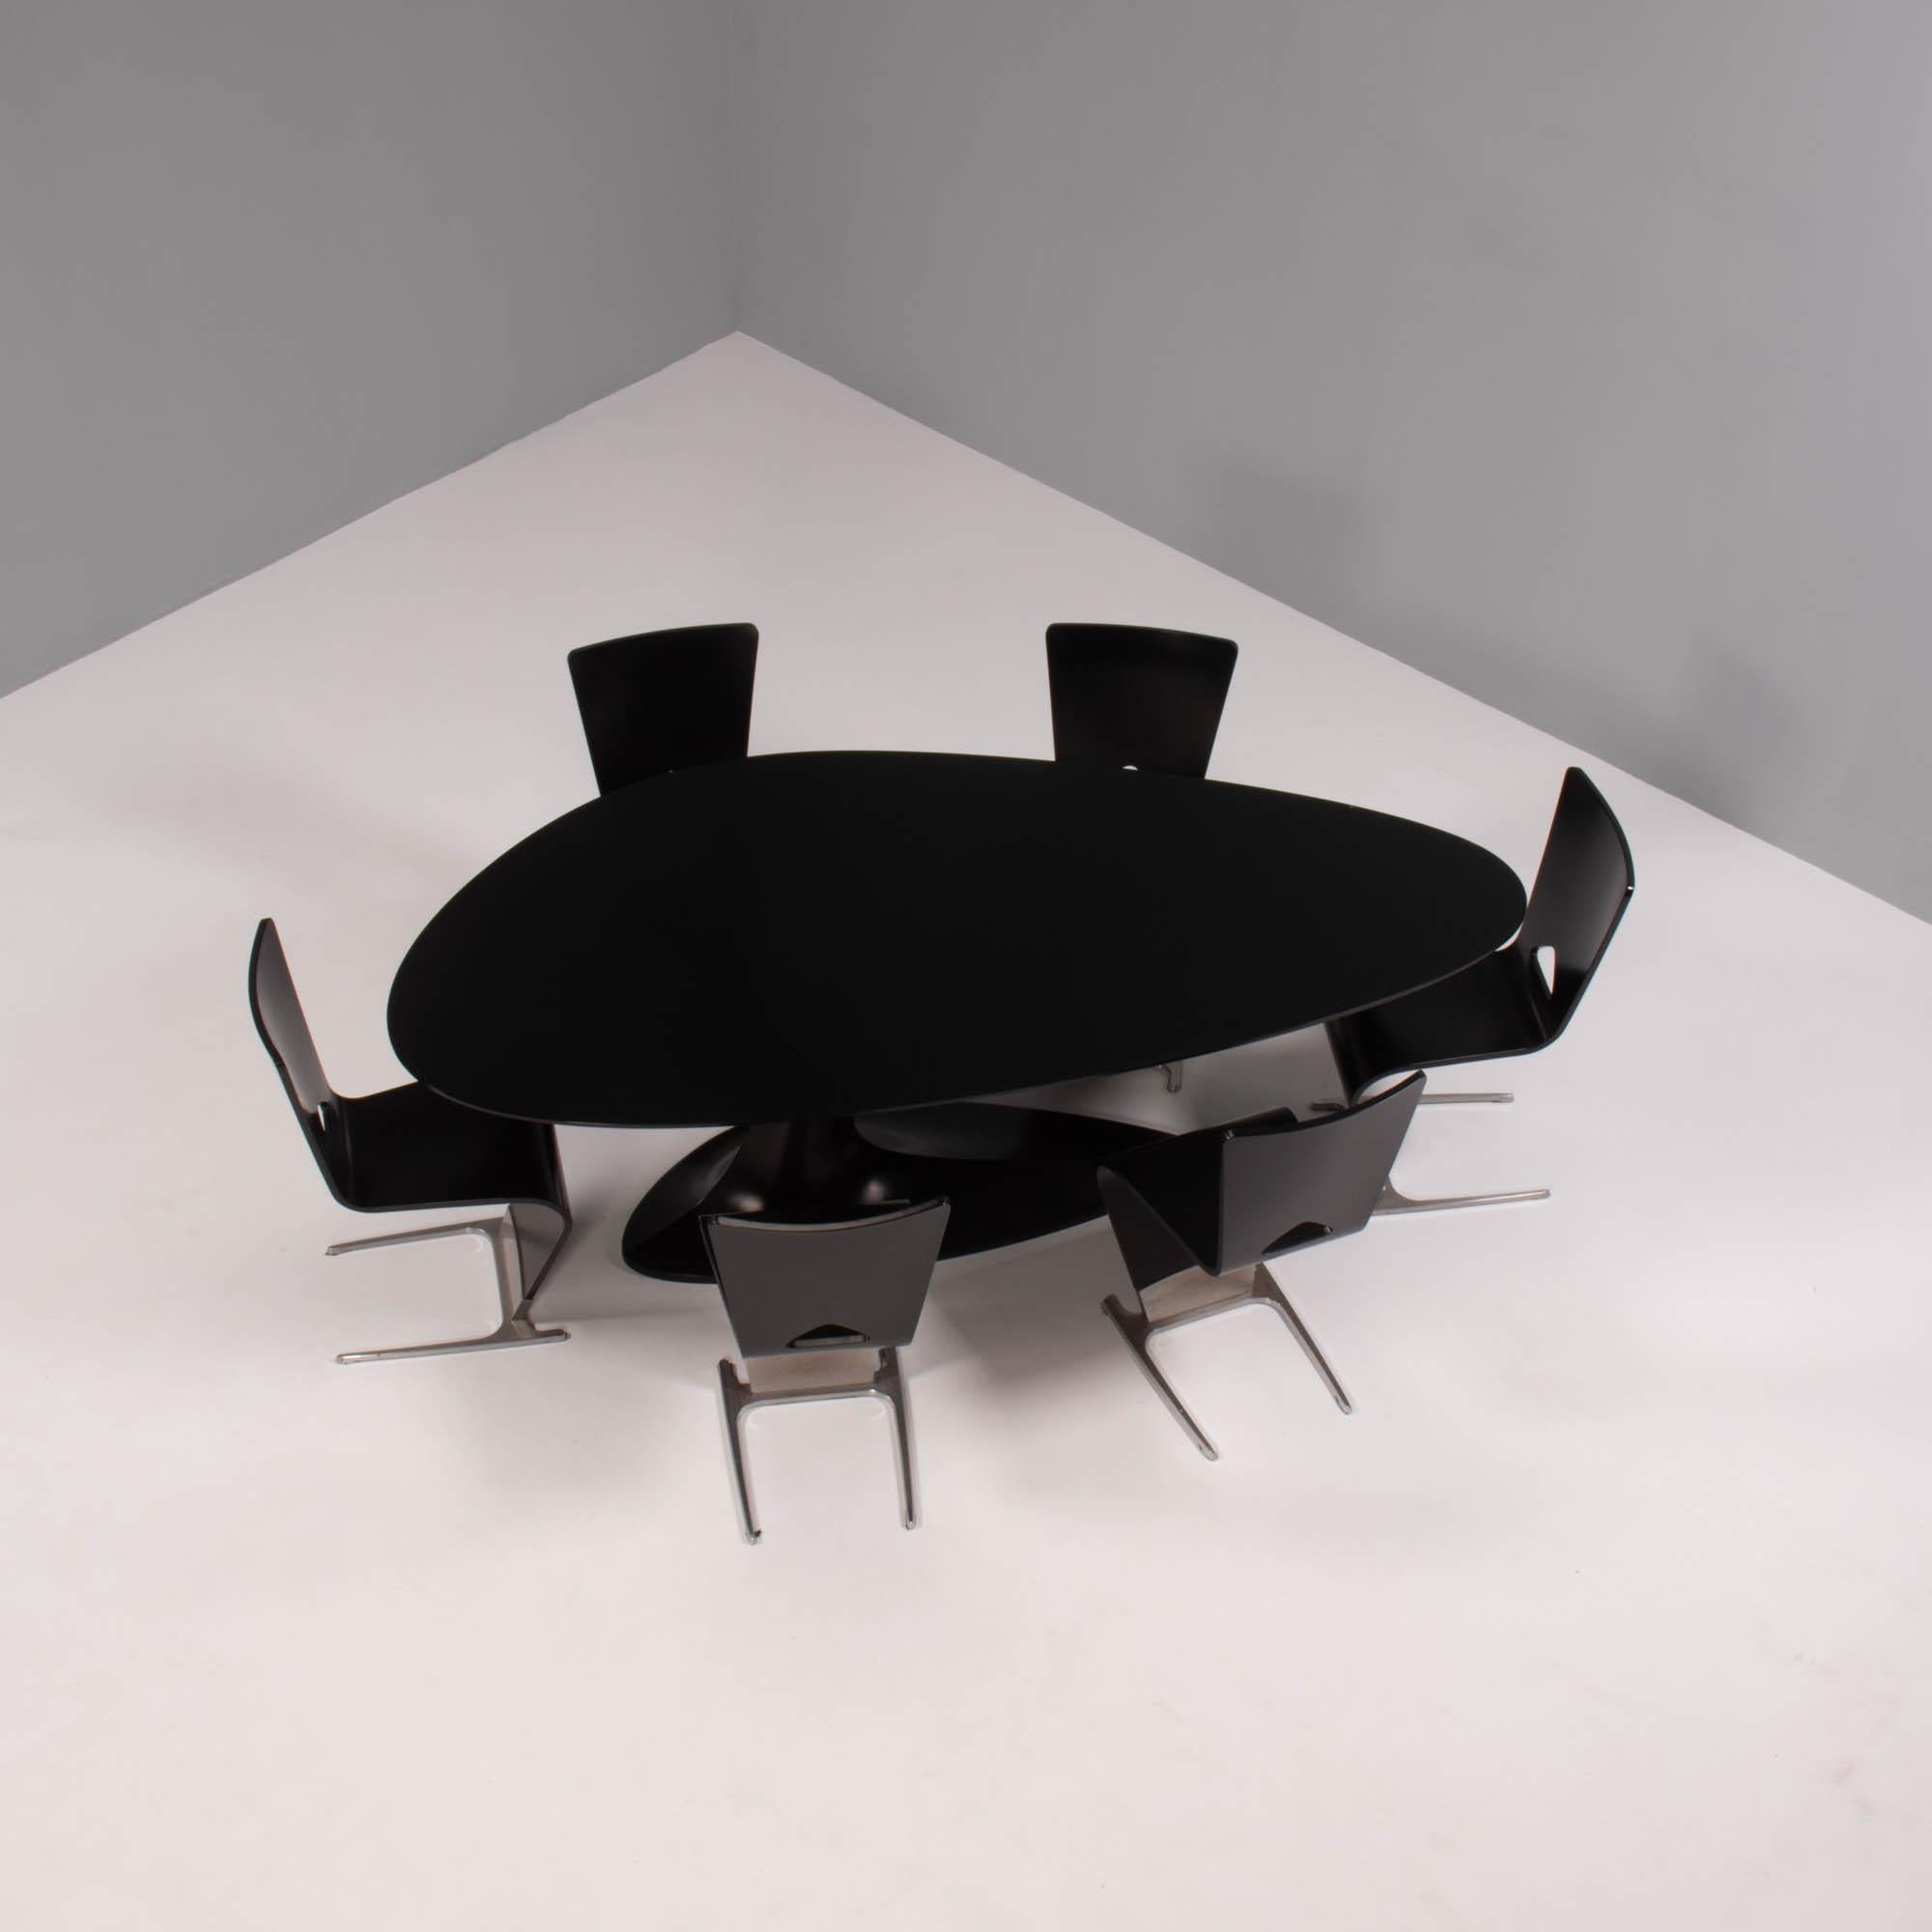 Designed by Sacha Lakic for Roche Bobois, the ‘Speed Up’ collection was a limited edition series inspired by movement, asymmetry and speed.

The dining table features an elliptical black glass top, sitting on a single black fibre-resin pedestal